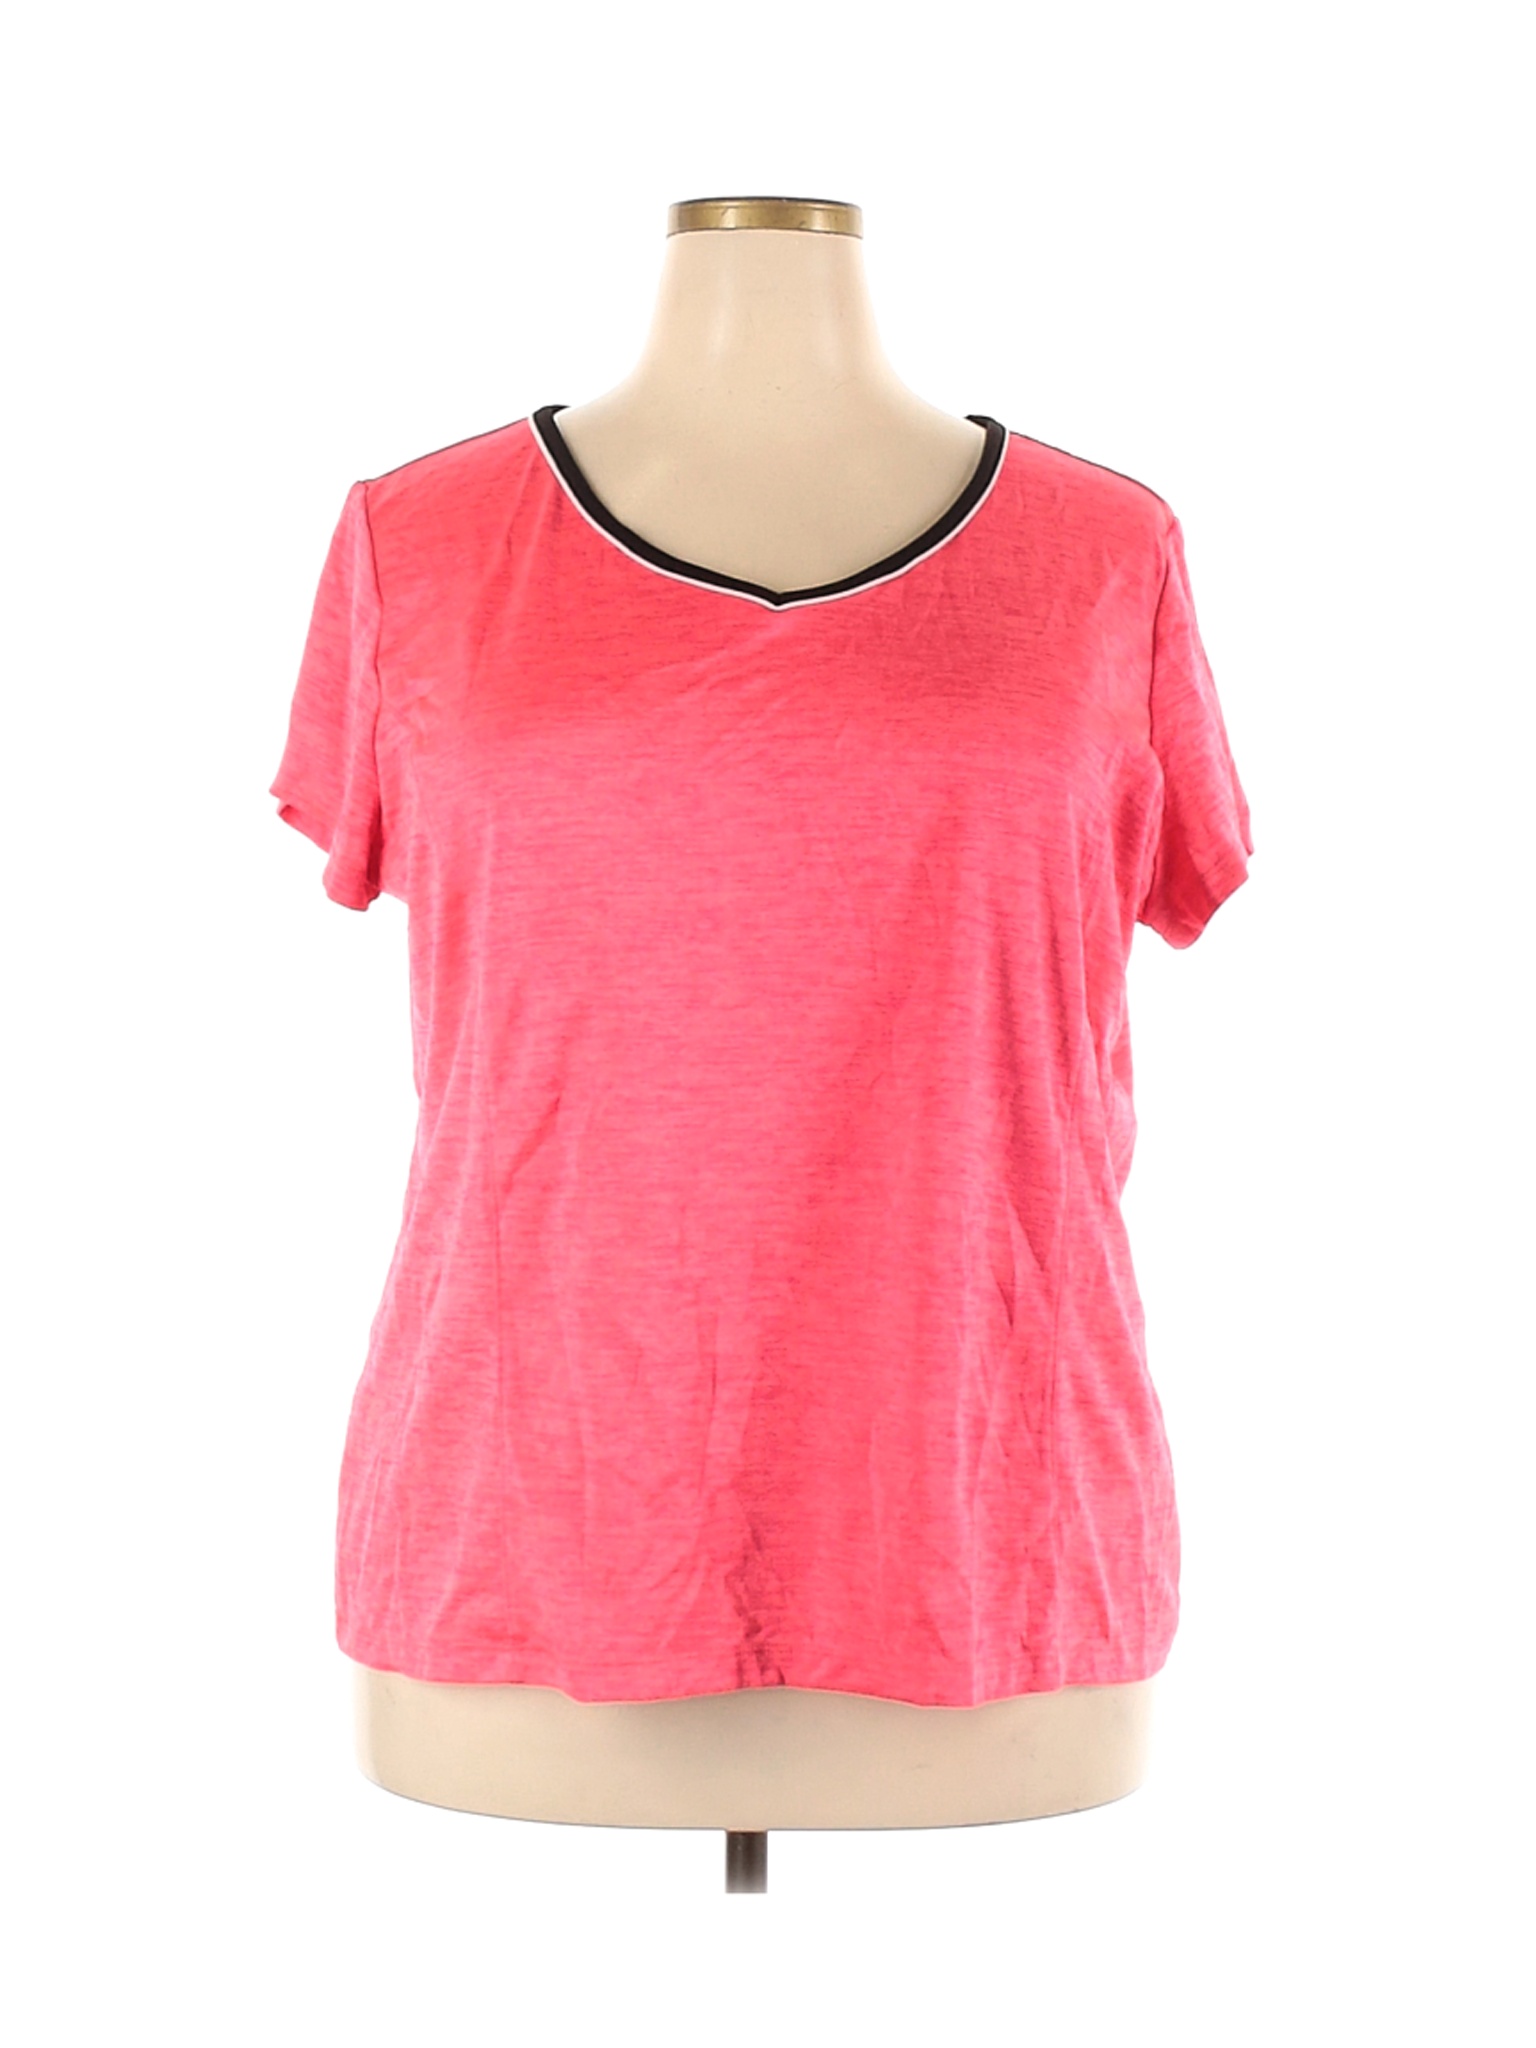 Made for Life Women Pink Active T-Shirt 2X Plus